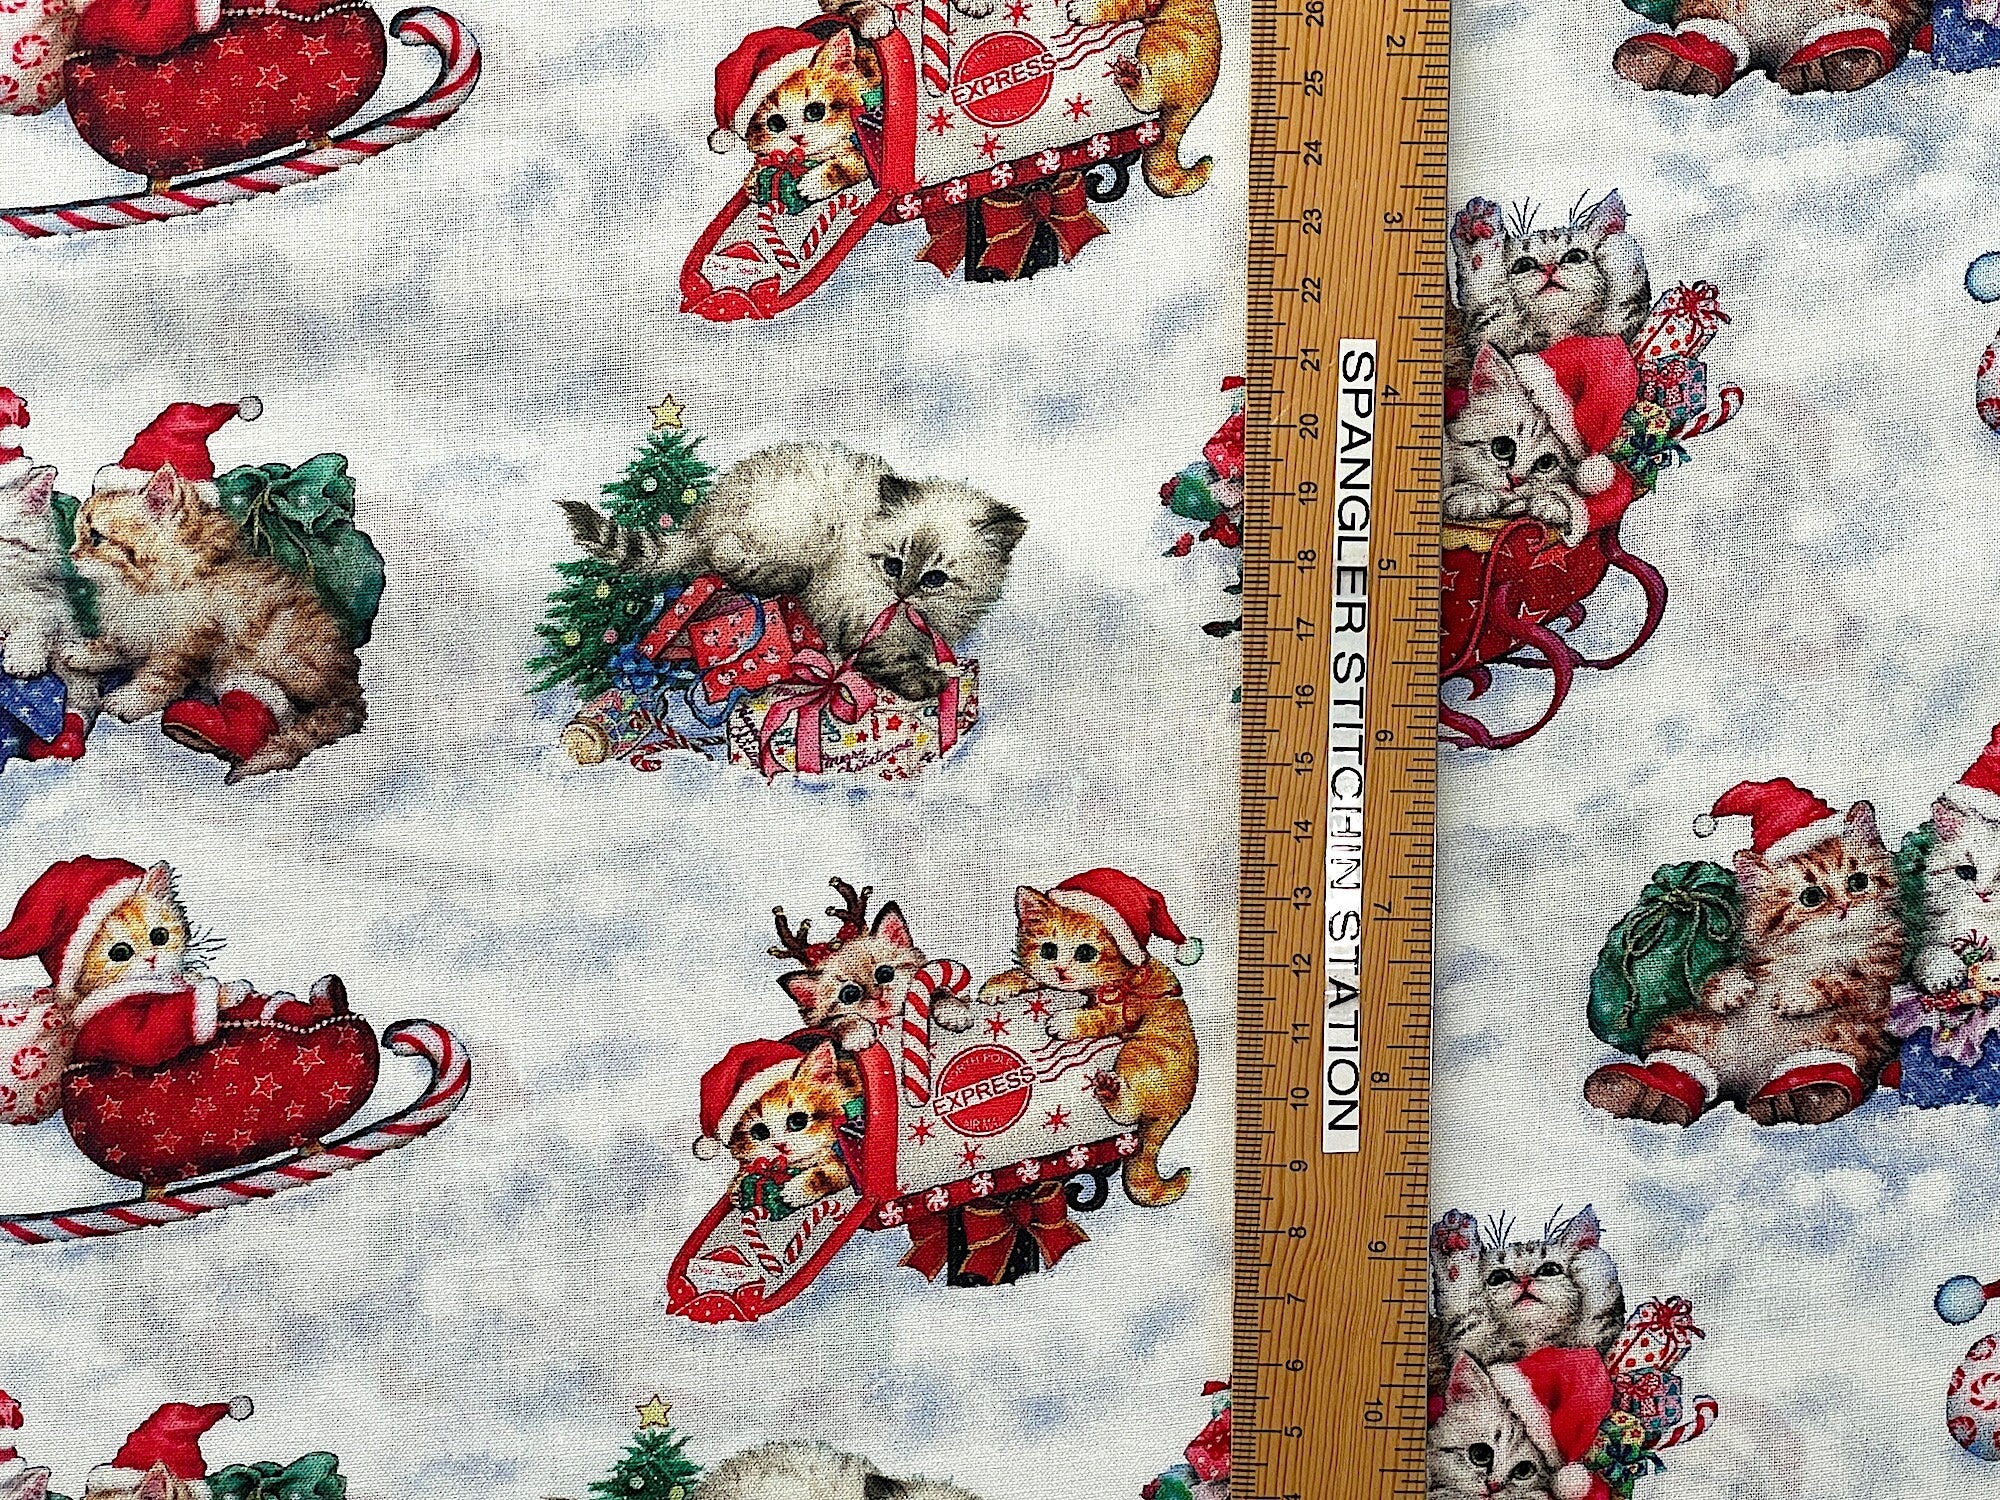 Ruler on fabric to show height.